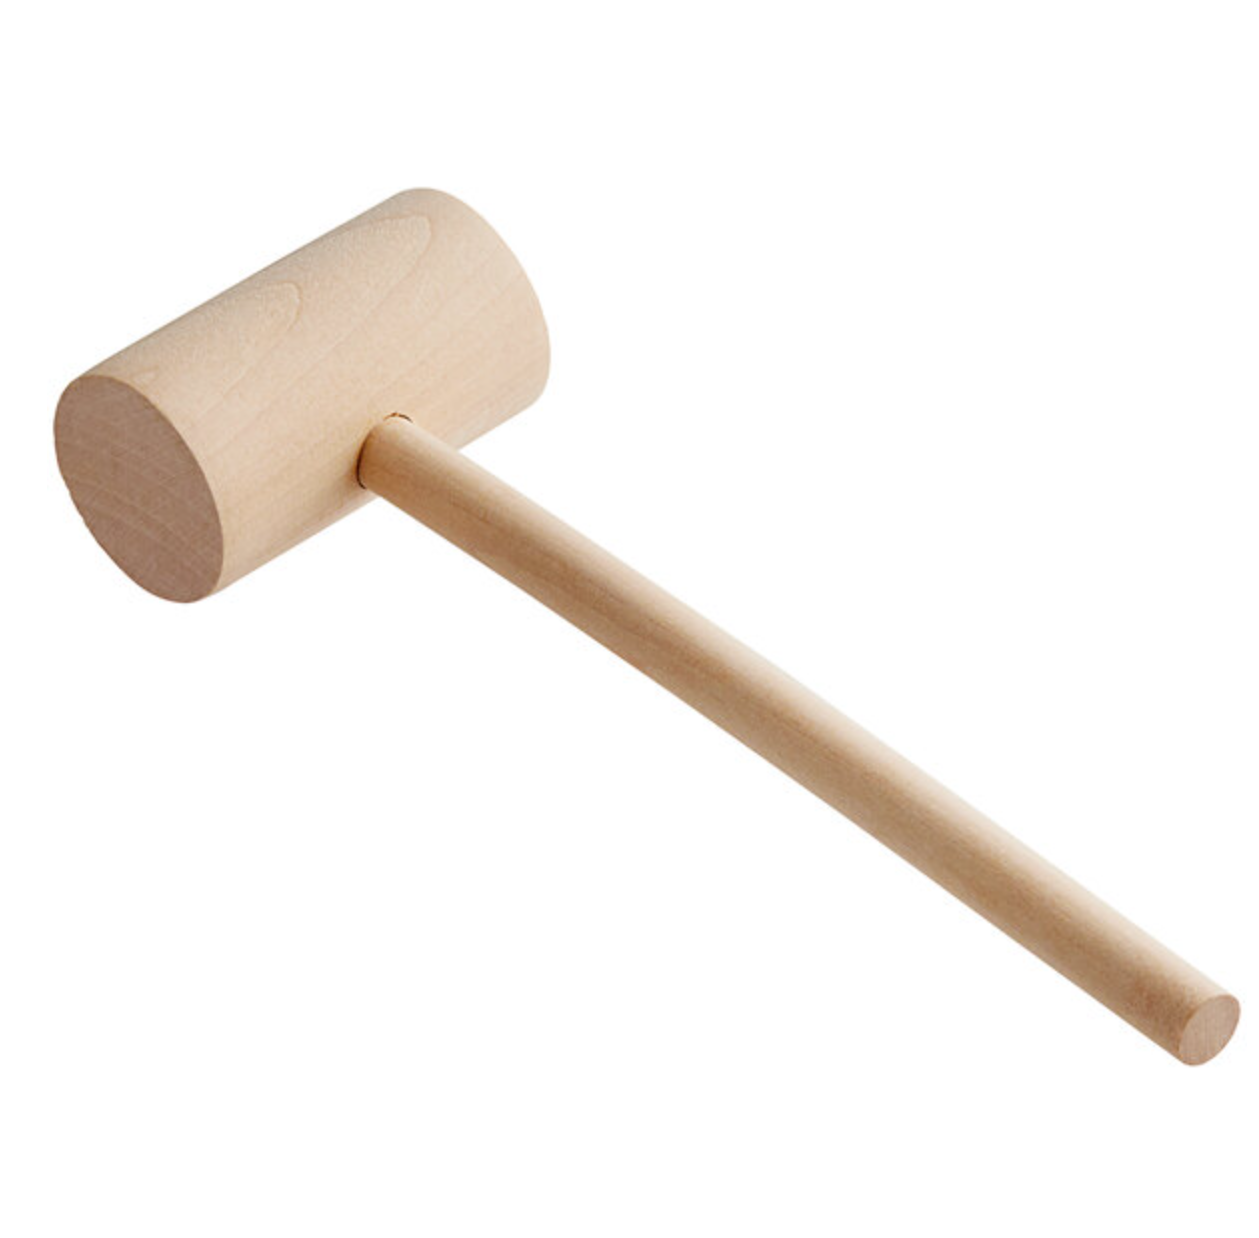 Southern Homewares Wooden Crab Mallet (4-Pack) SH-10188-S4 - The Home Depot